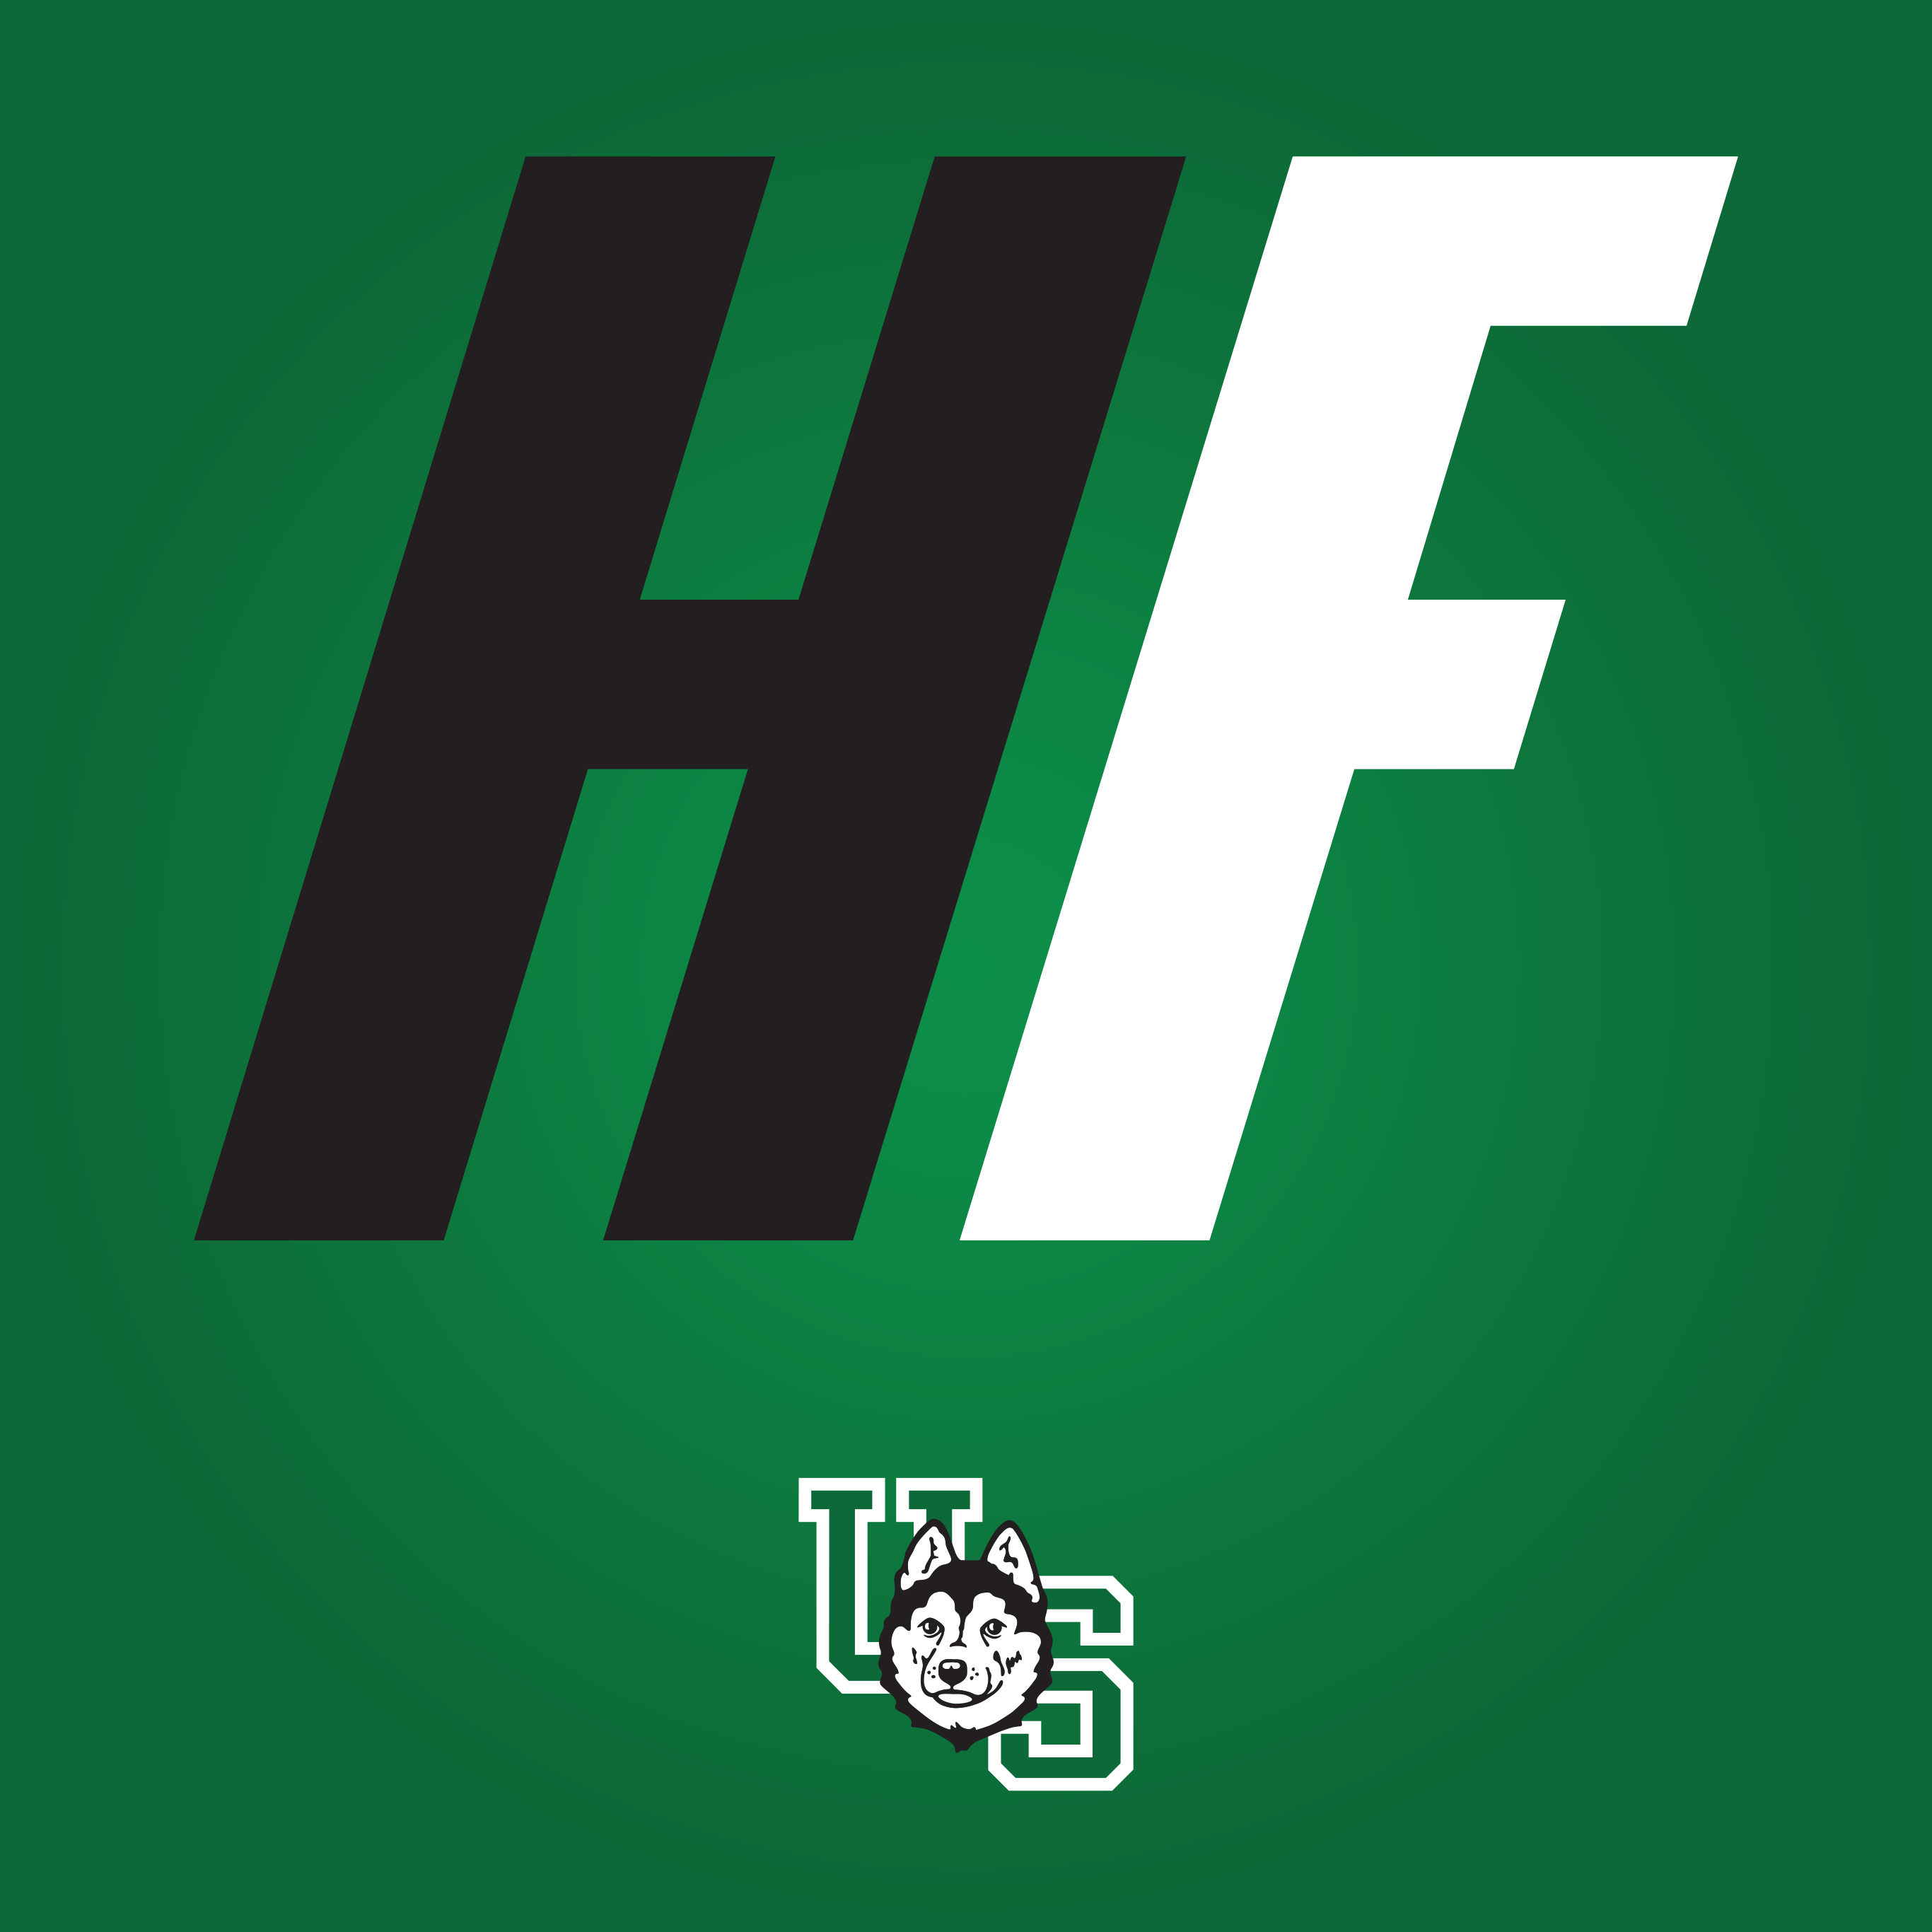 HuskieFAN Podcast – Coaches Show with Wray Morrison and Scott Flory (Nov. 25, 2021)